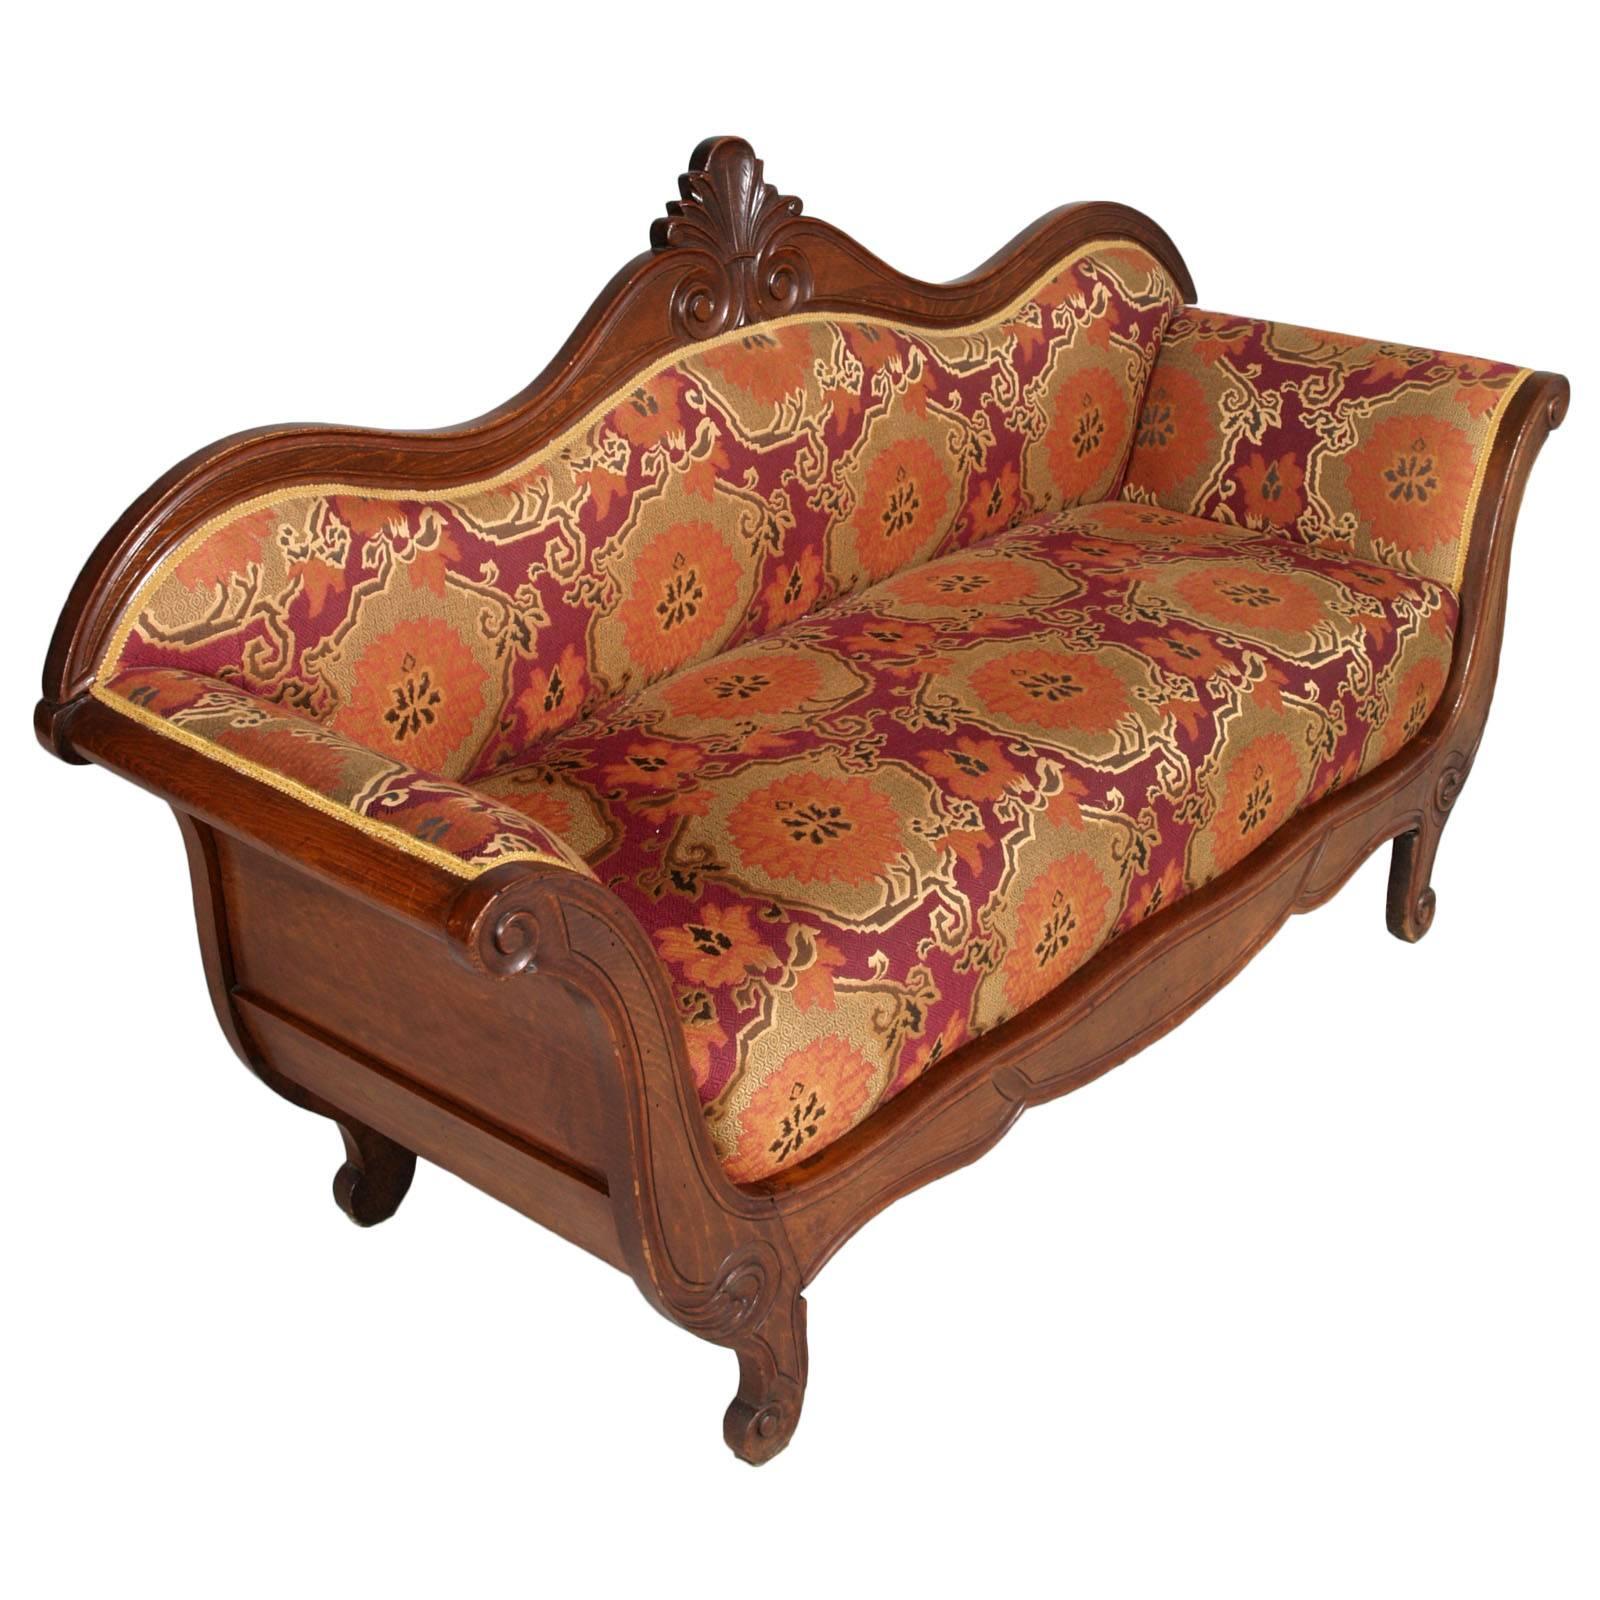 Precious mid-19th century Venetian sofa attributable to Valentino Panciera Besarel in hand-carved walnut, restored and finished to wax. Coated with precious original Venetian brocade fabric of the deco period; includes a sofa cover of the same